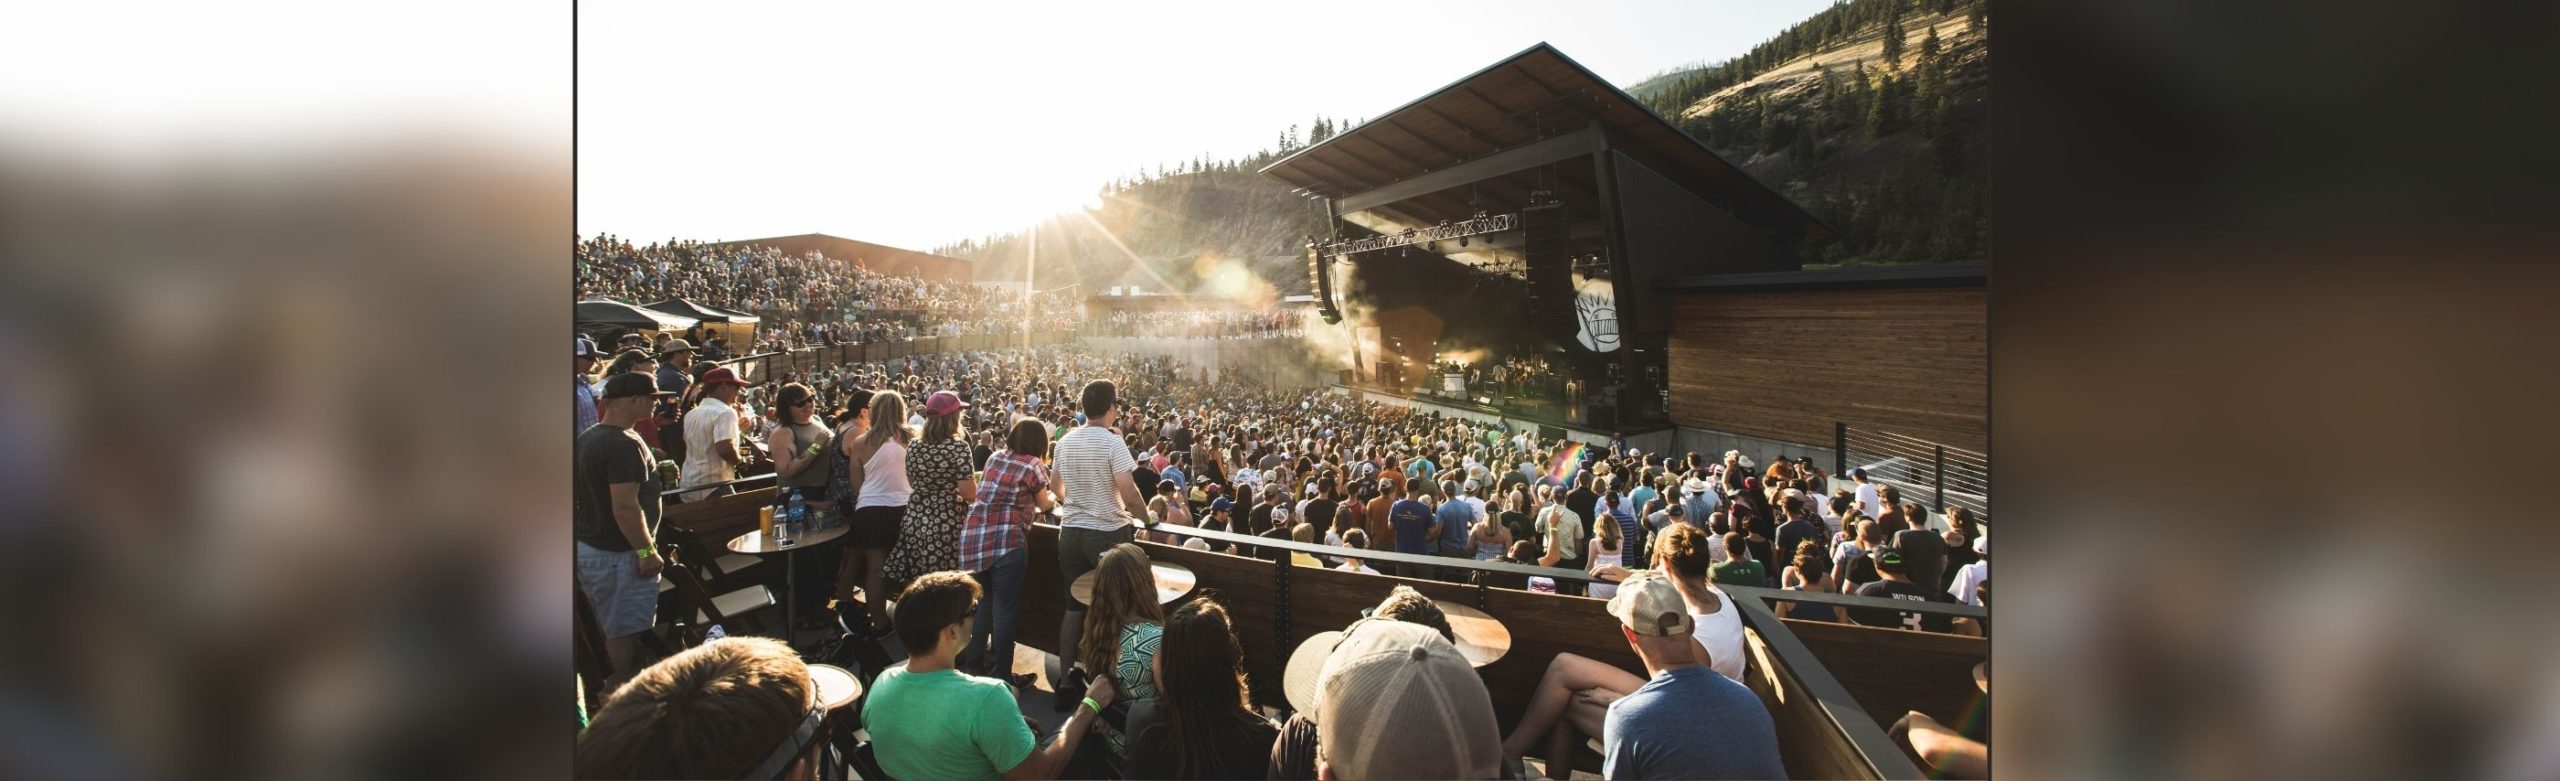 Premium Box Seats Released for The National w/ Bartees Strange at KettleHouse Amphitheater Image